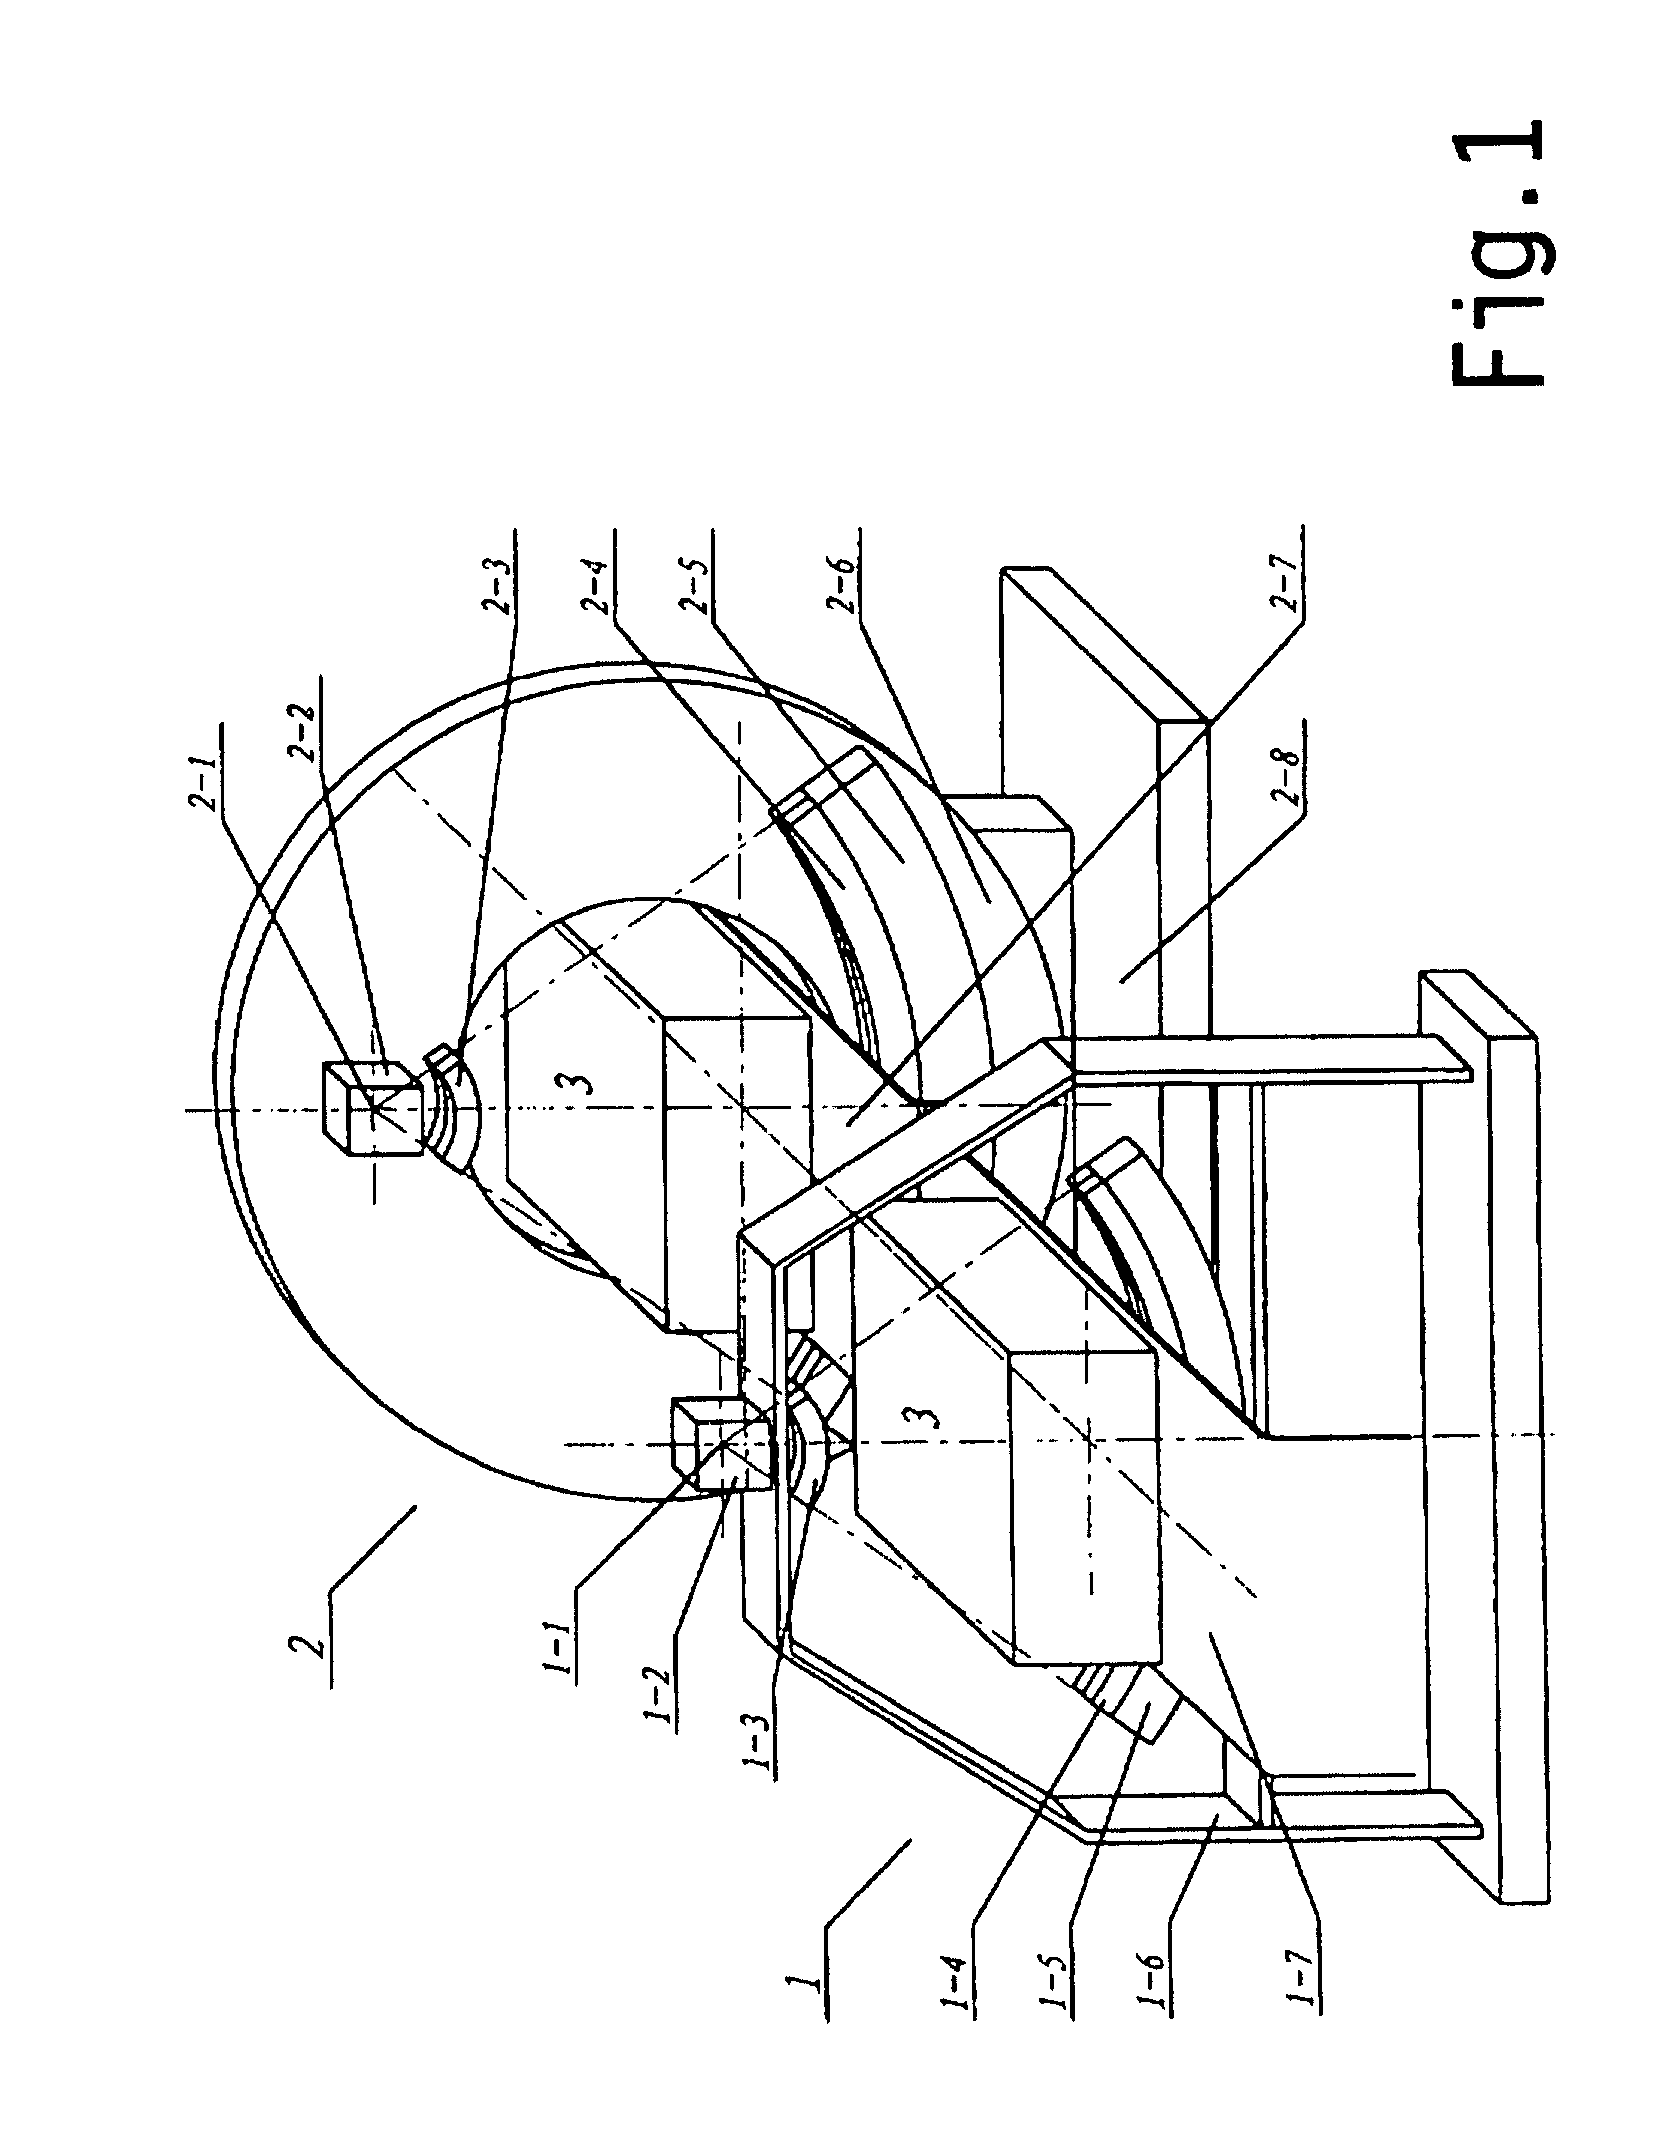 Gamma radiation imaging system for non-destructive inspection of the luggage